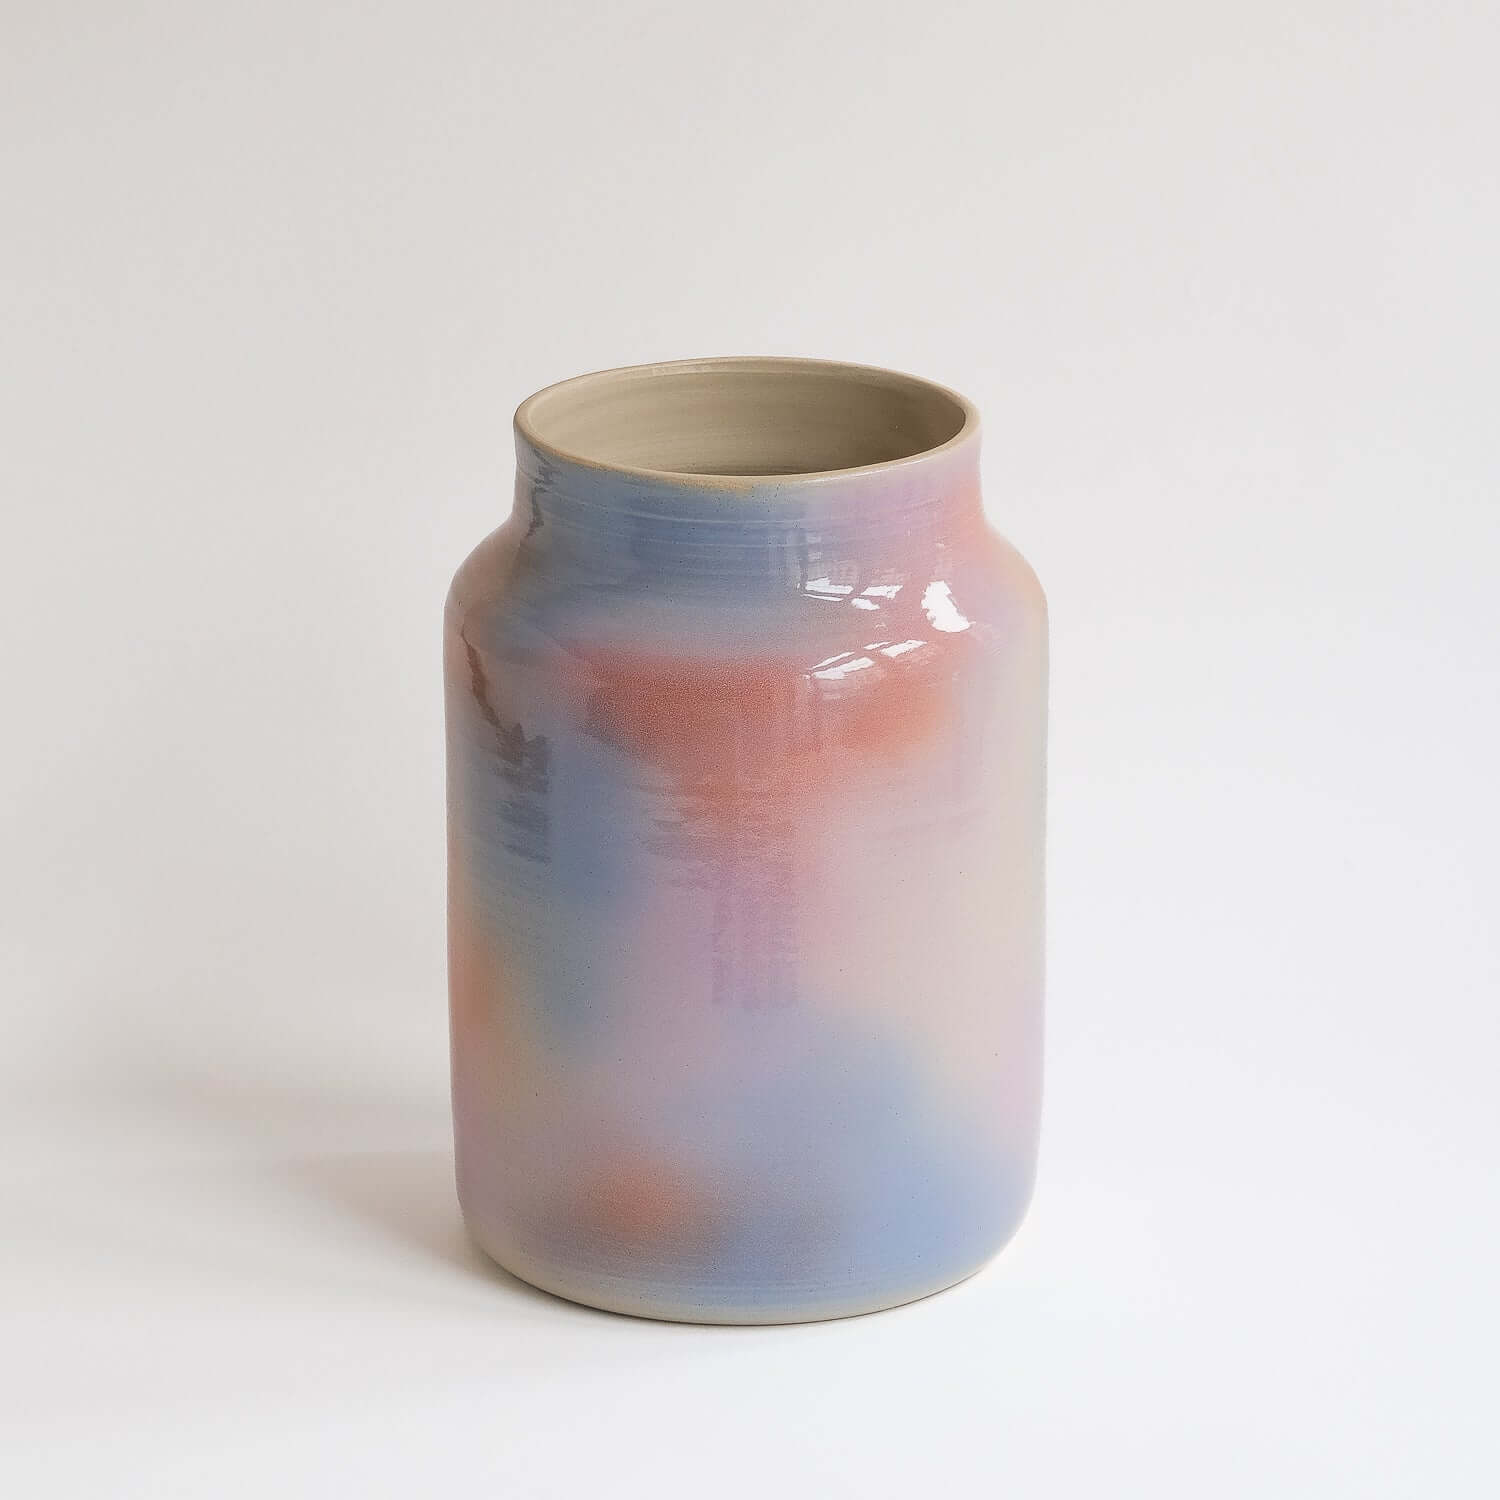 Brighten up your space with our special edition Dawn Vase. Handcrafted, unique, and bursting with a vibrant color gradient. Limited stock! von viola beuscher ceramics